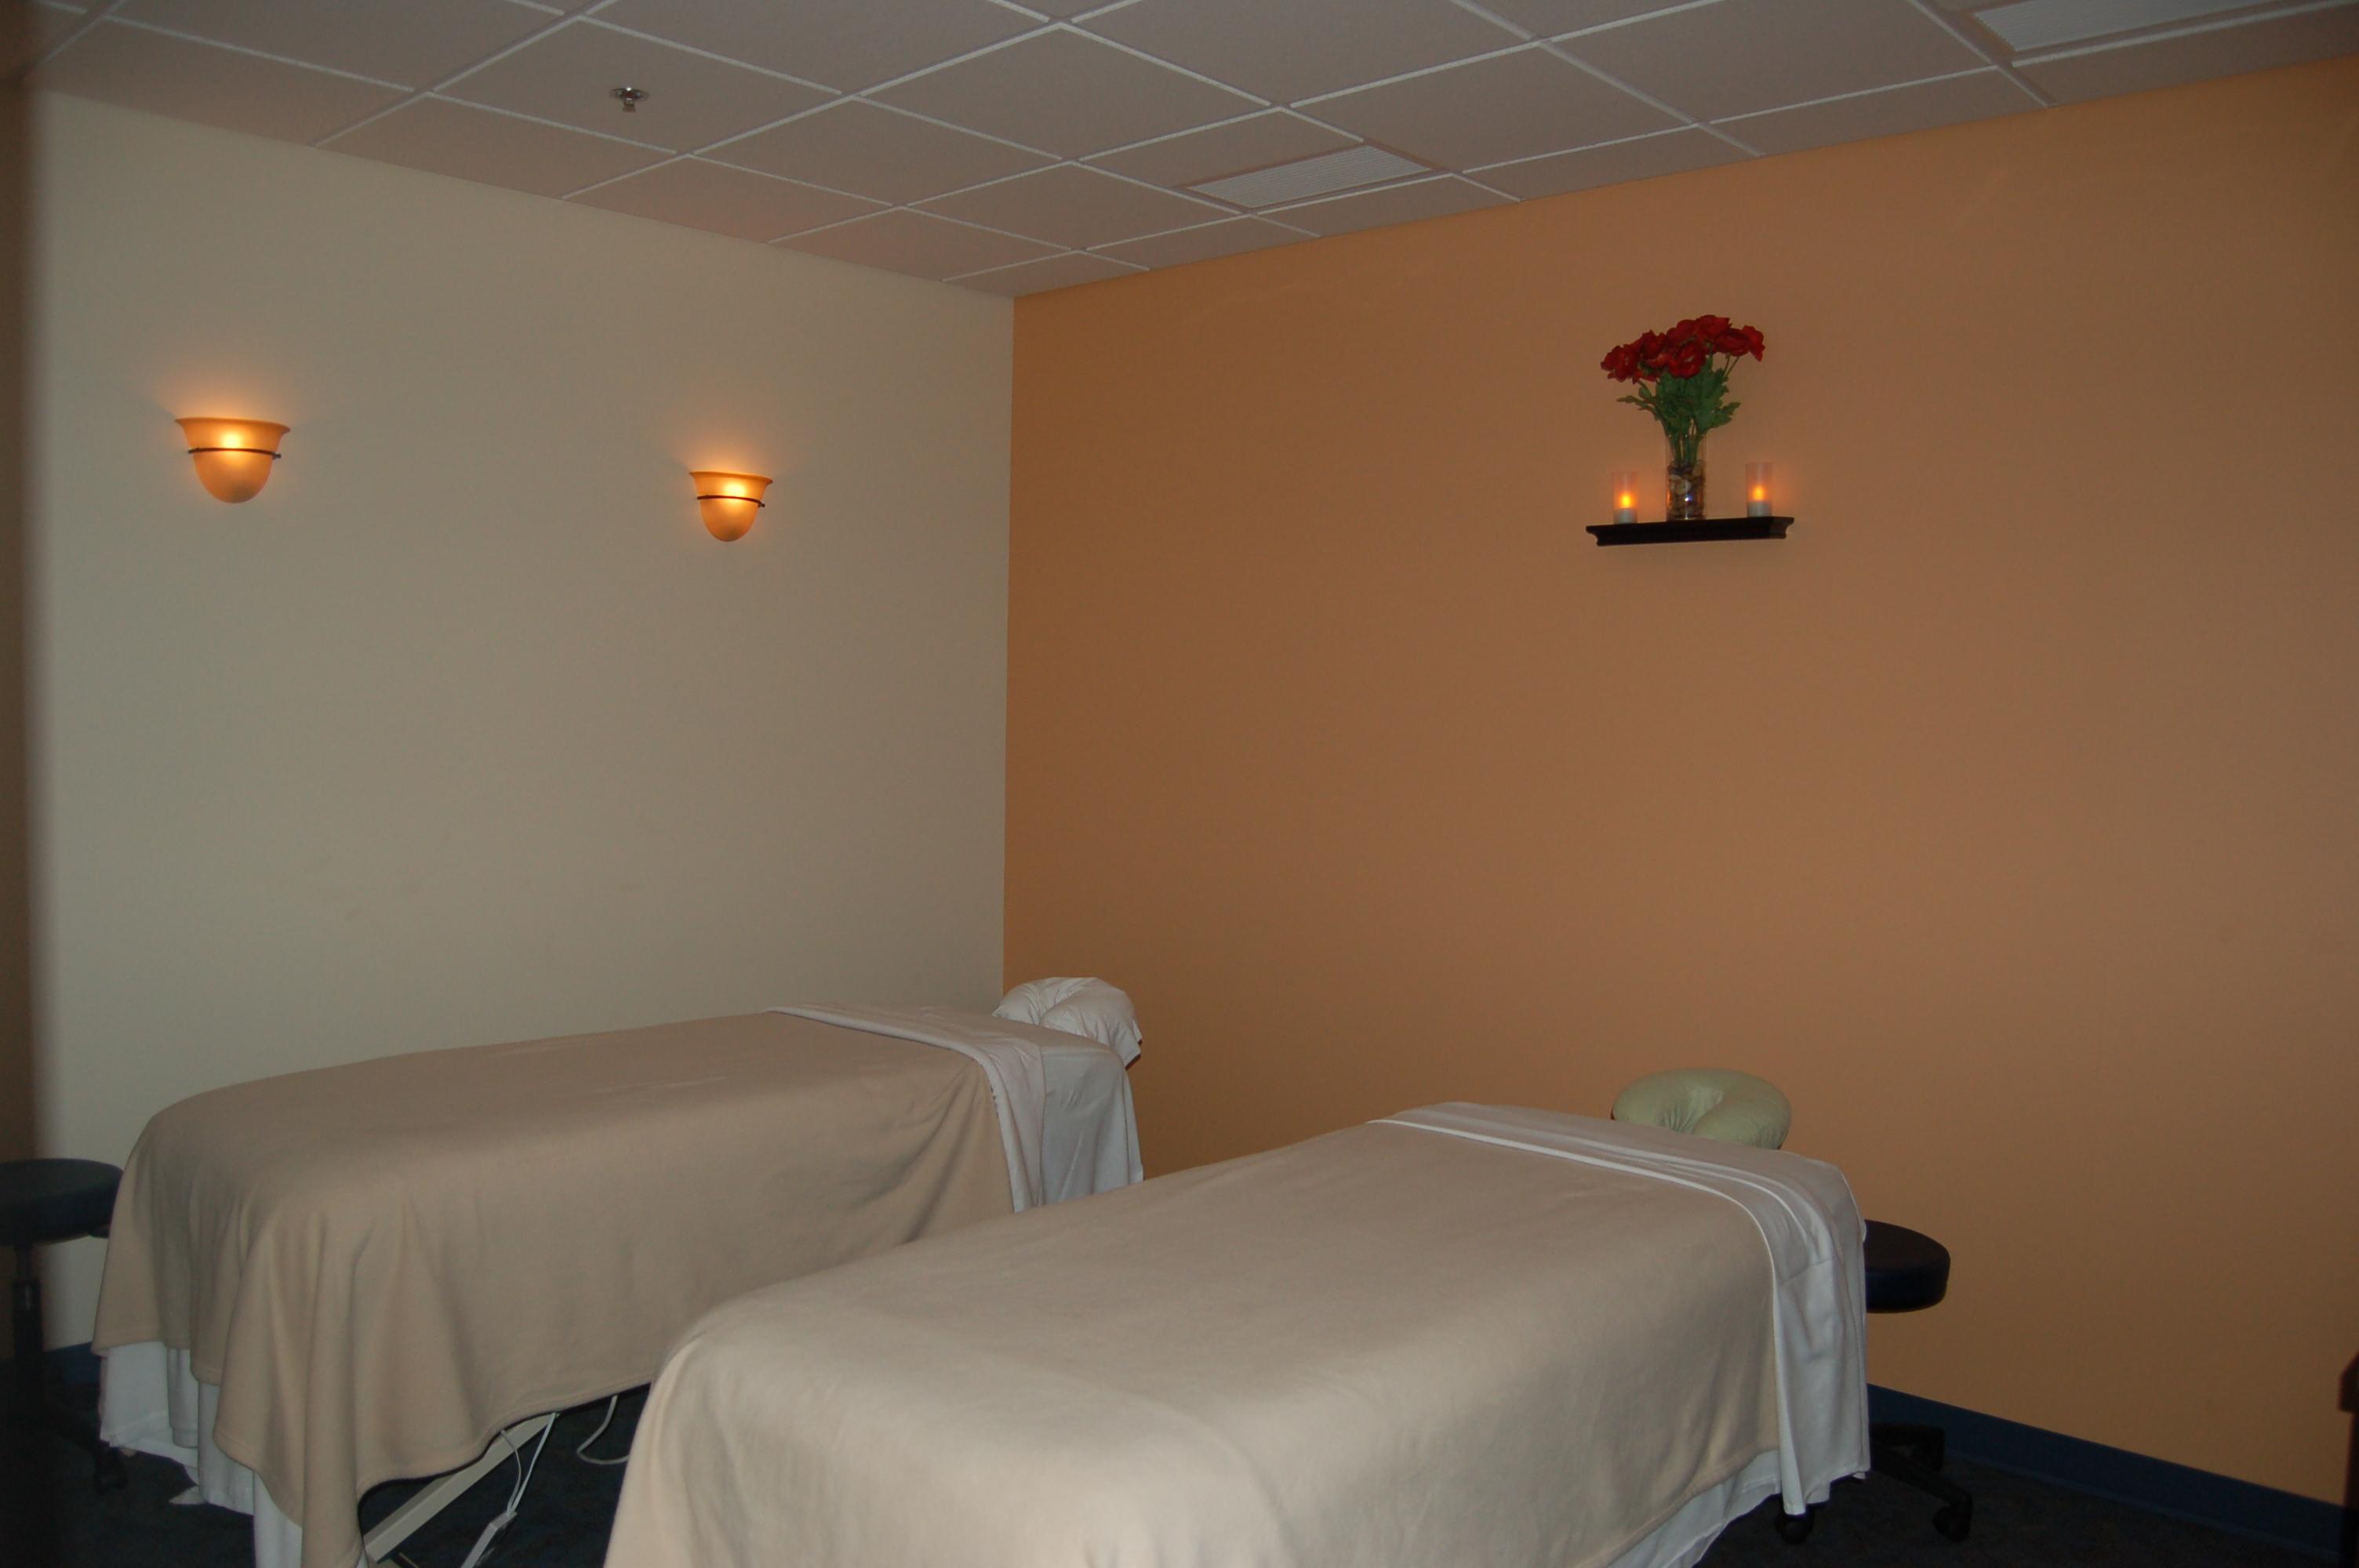 Hand & Stone Massage and Facial Spa Coupons Columbus OH ...